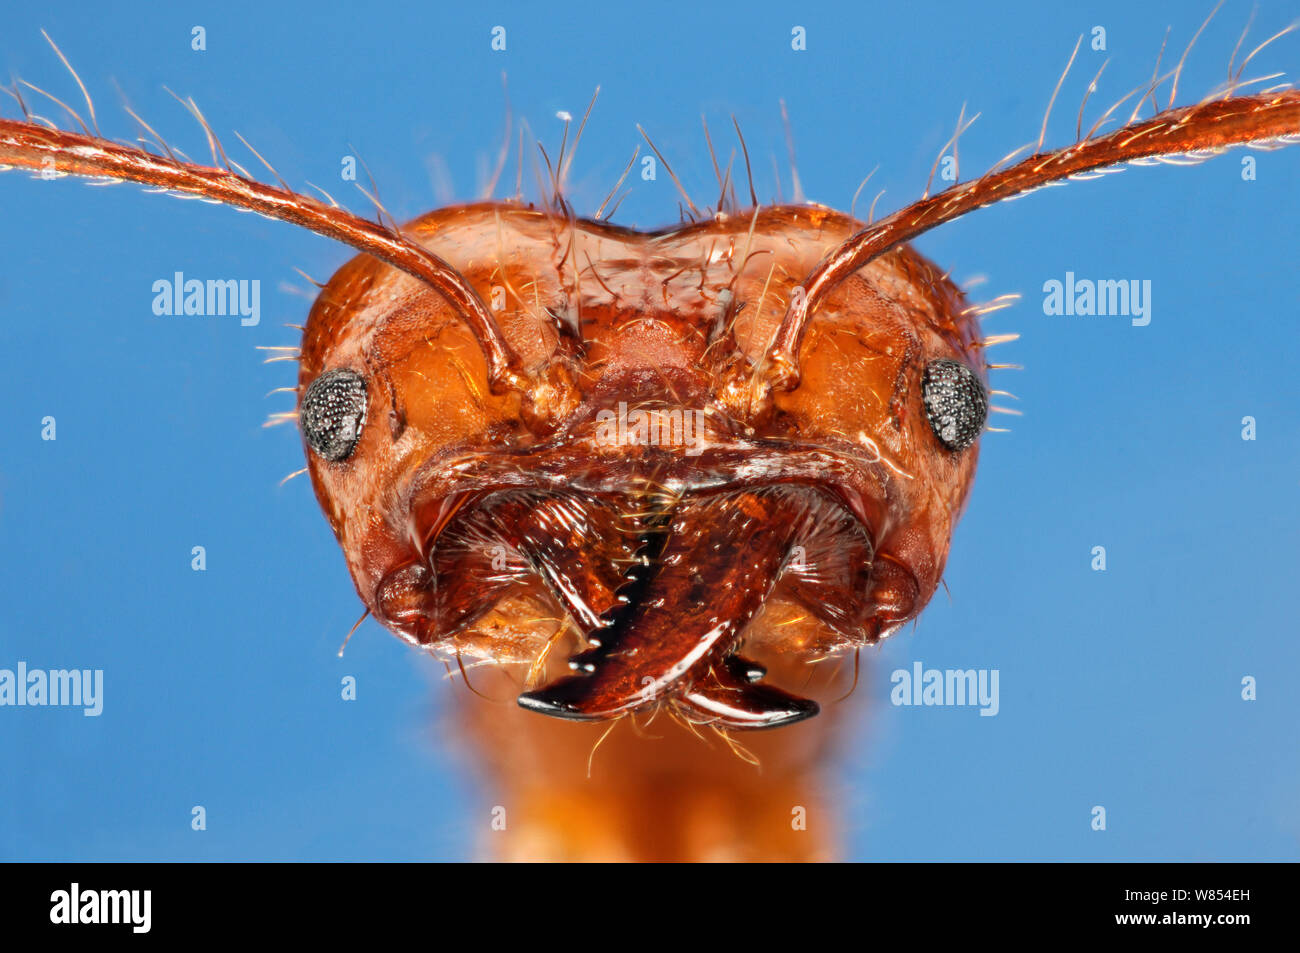 Leaf cutter ant (Atta cephalotes ) close-up. Specimen photographed using digital focus stacking Stock Photo